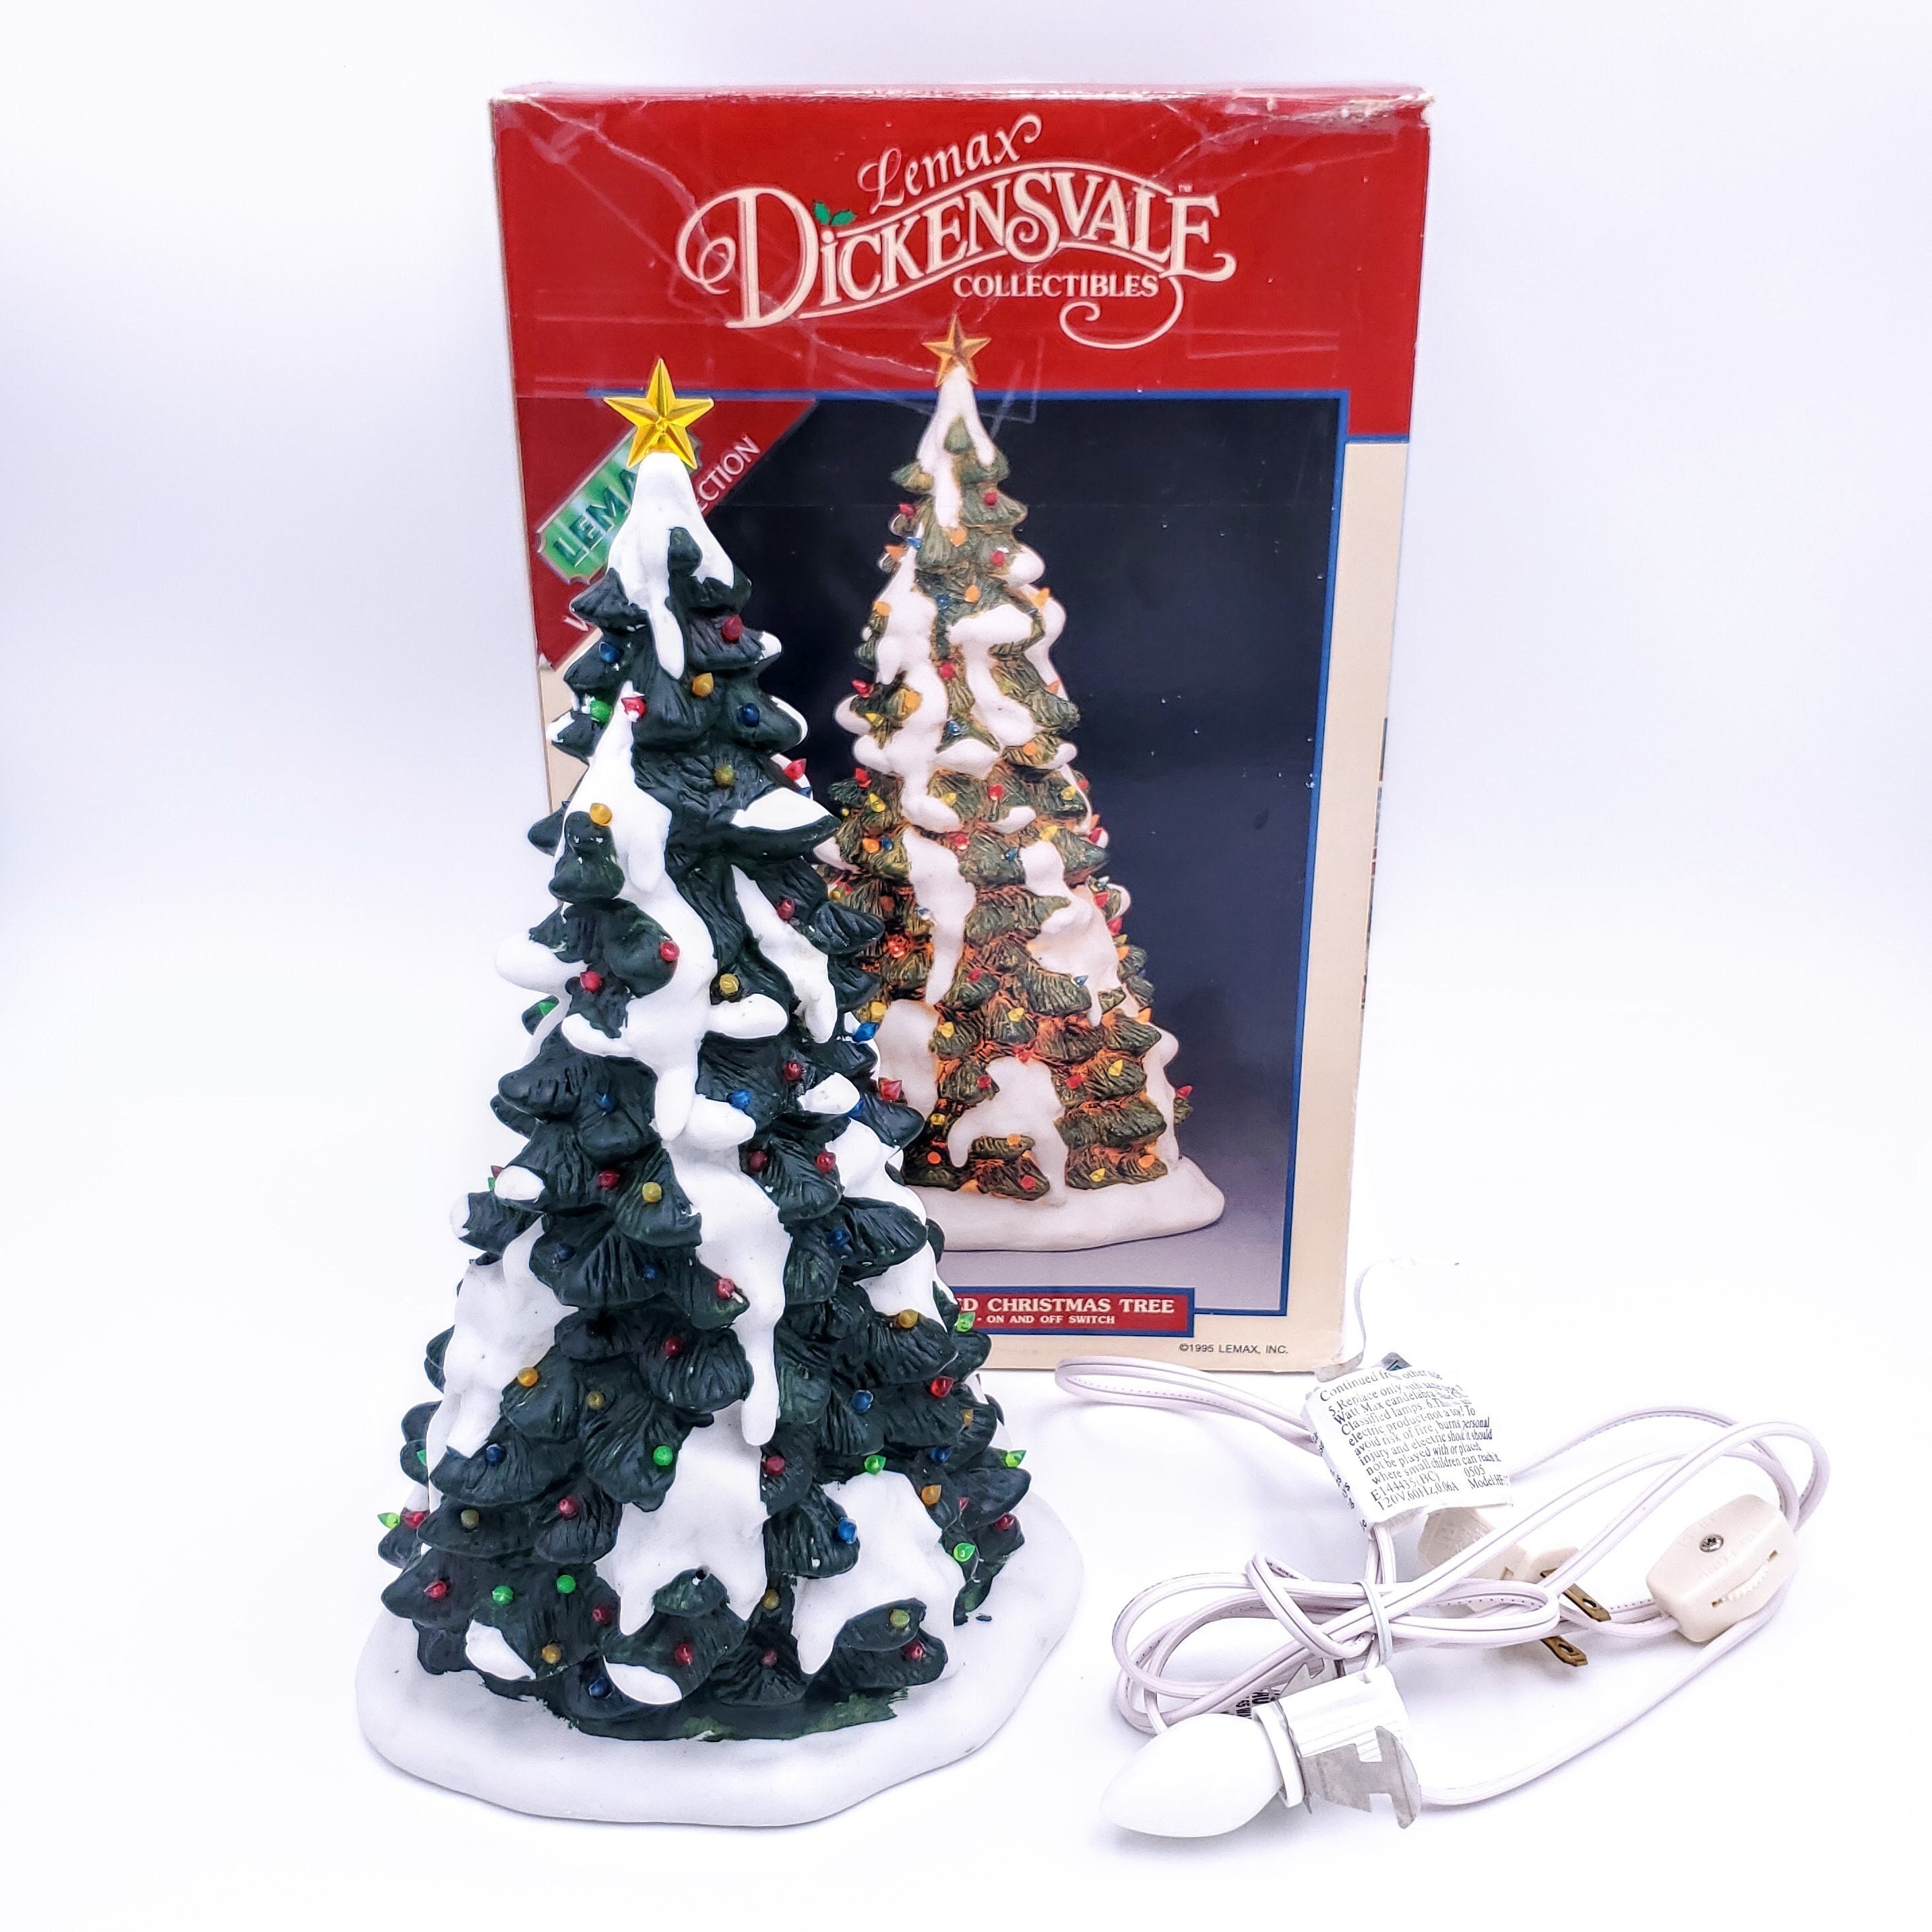 Christmas Village Accessories by Lemax. Illuminated Northwood's Lodge. Very  Detailed Nondenominational Holiday Decor. 